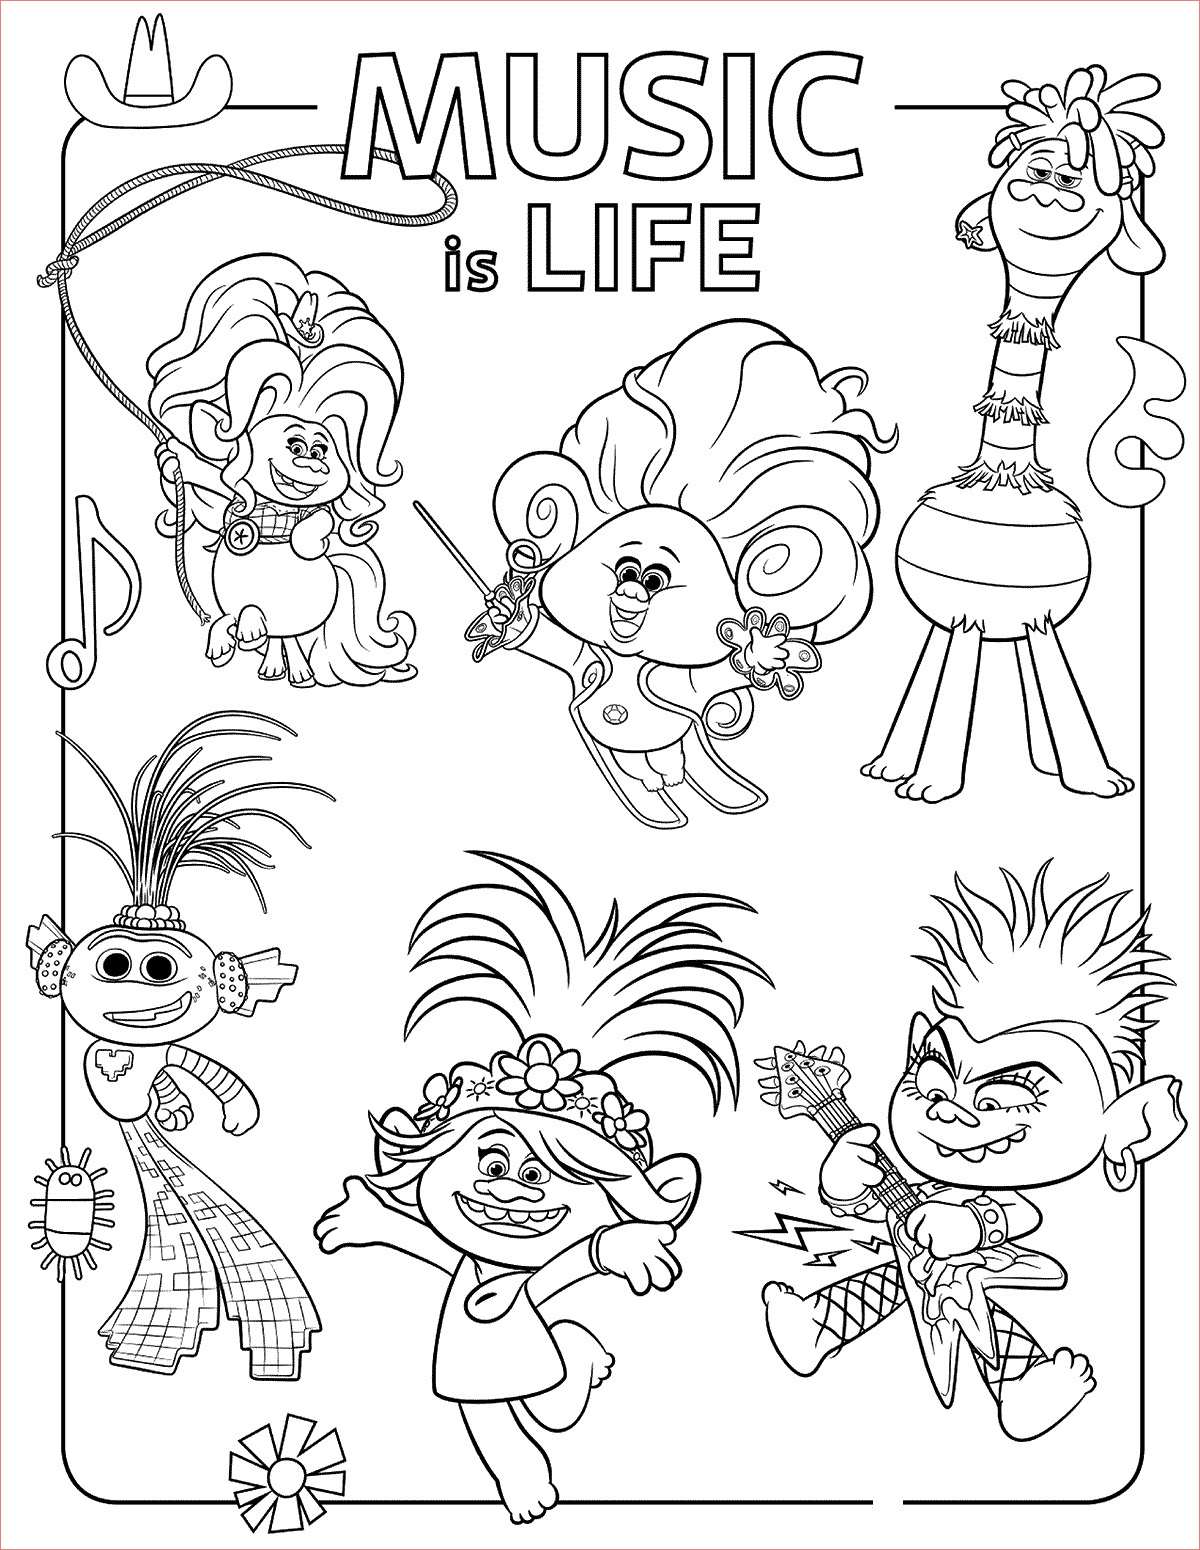 trolls world tour coloring pages